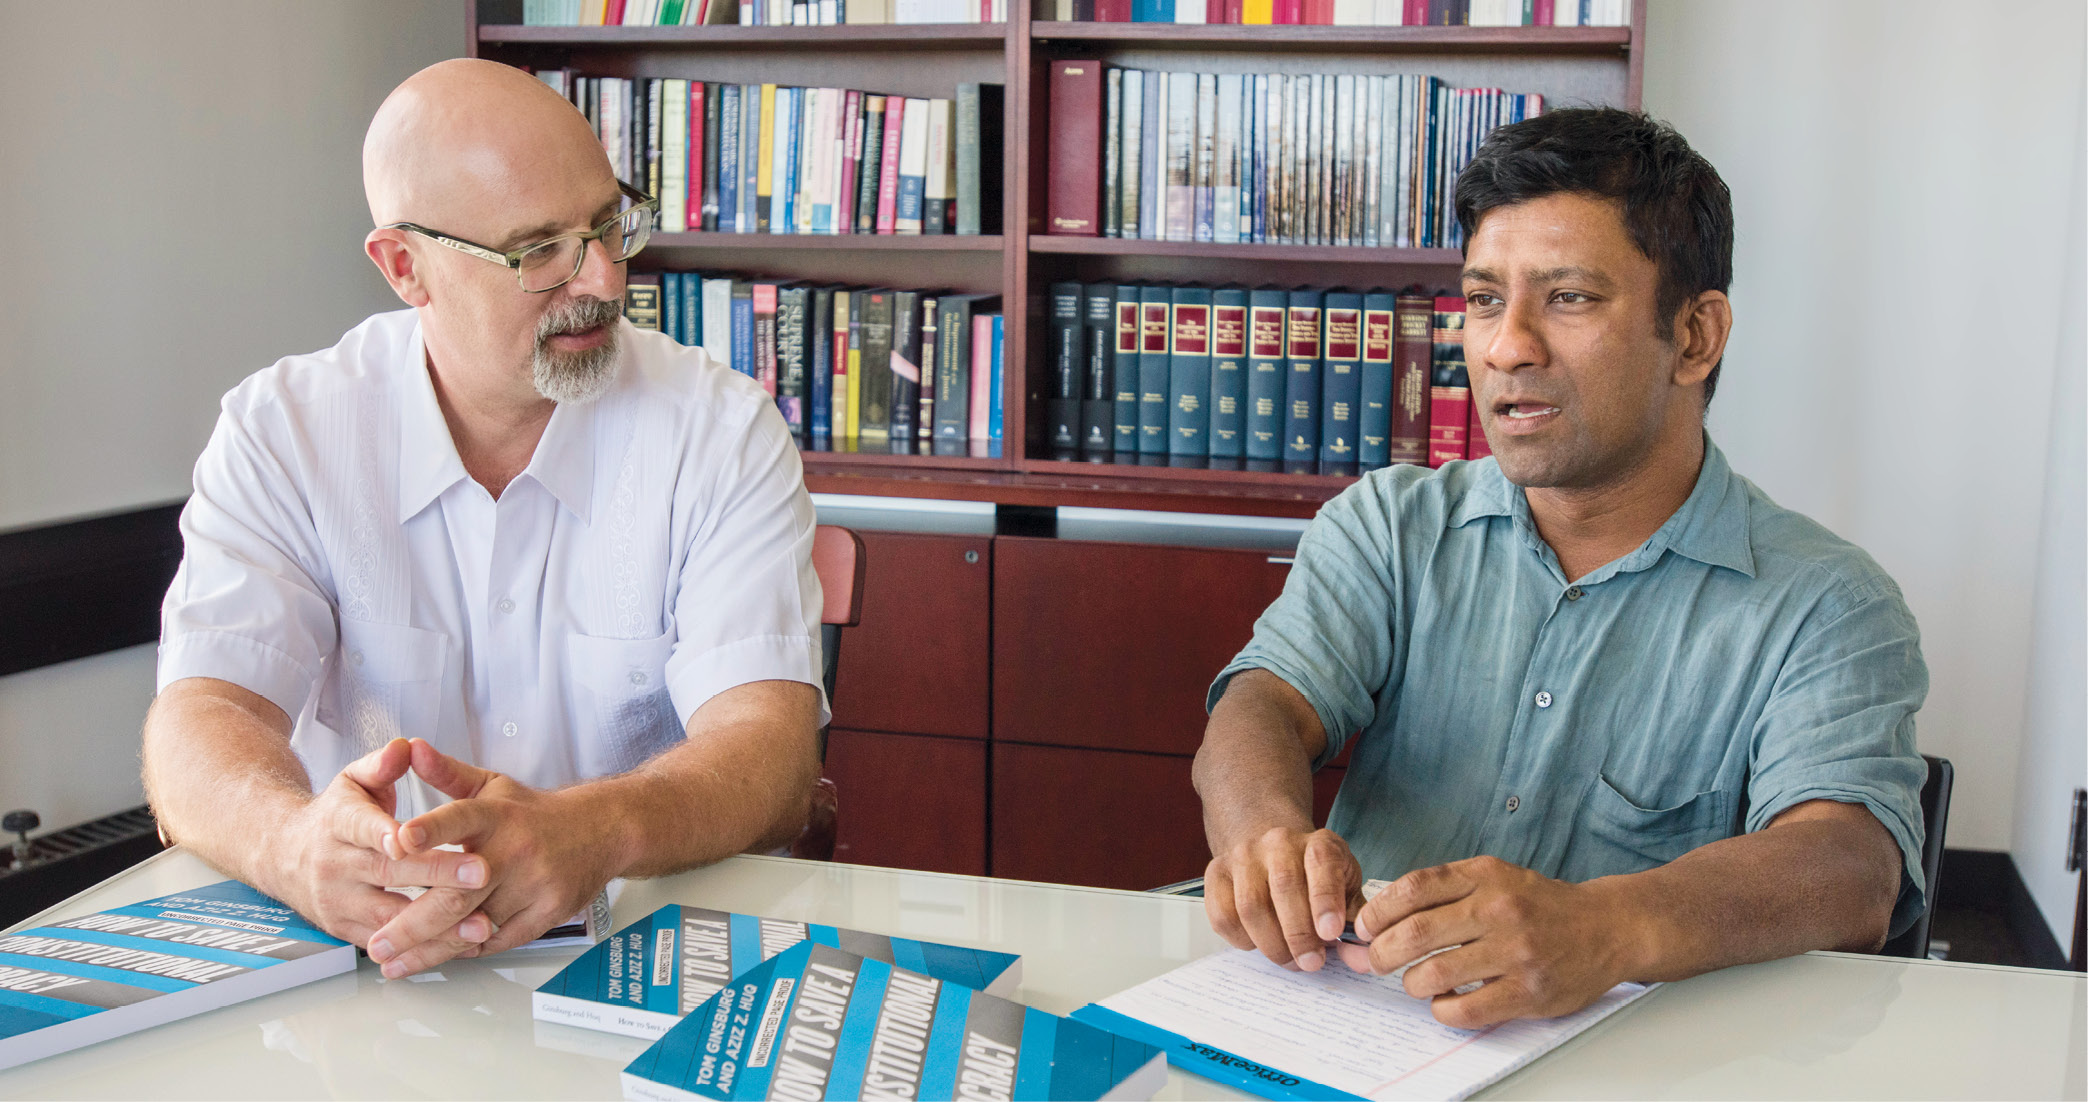 Professors Tom Ginsburg and Aziz Huq with their book, "How to Save a Constitutional Democracy"